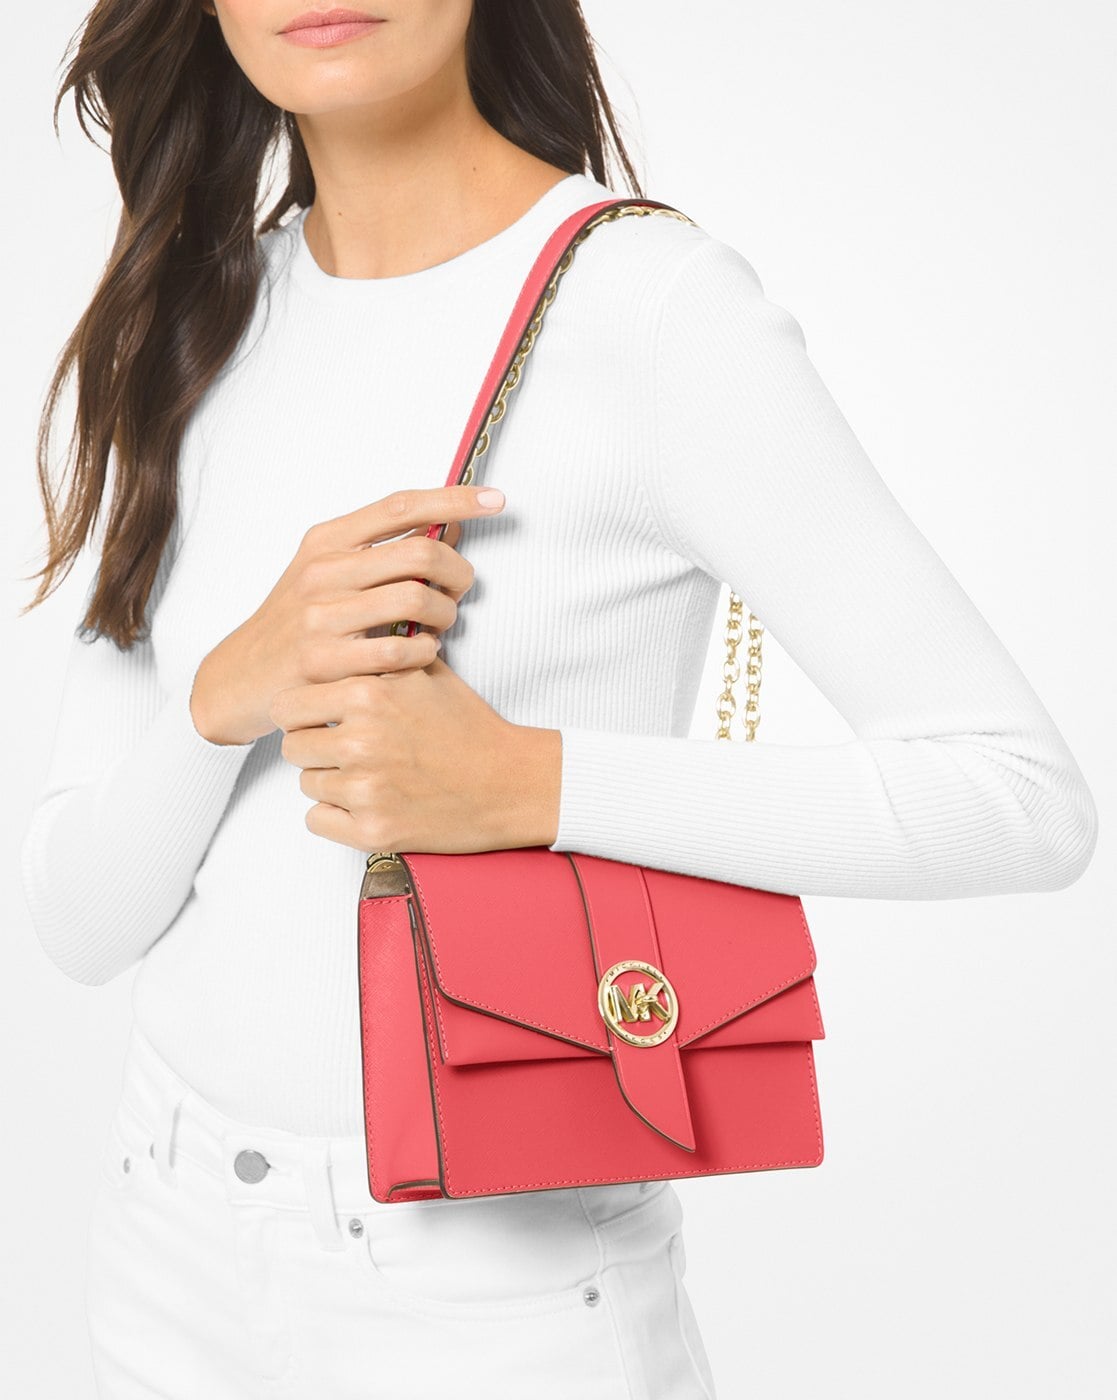 Michael Kors - Shore thing: our Greenwich crossbody bag in